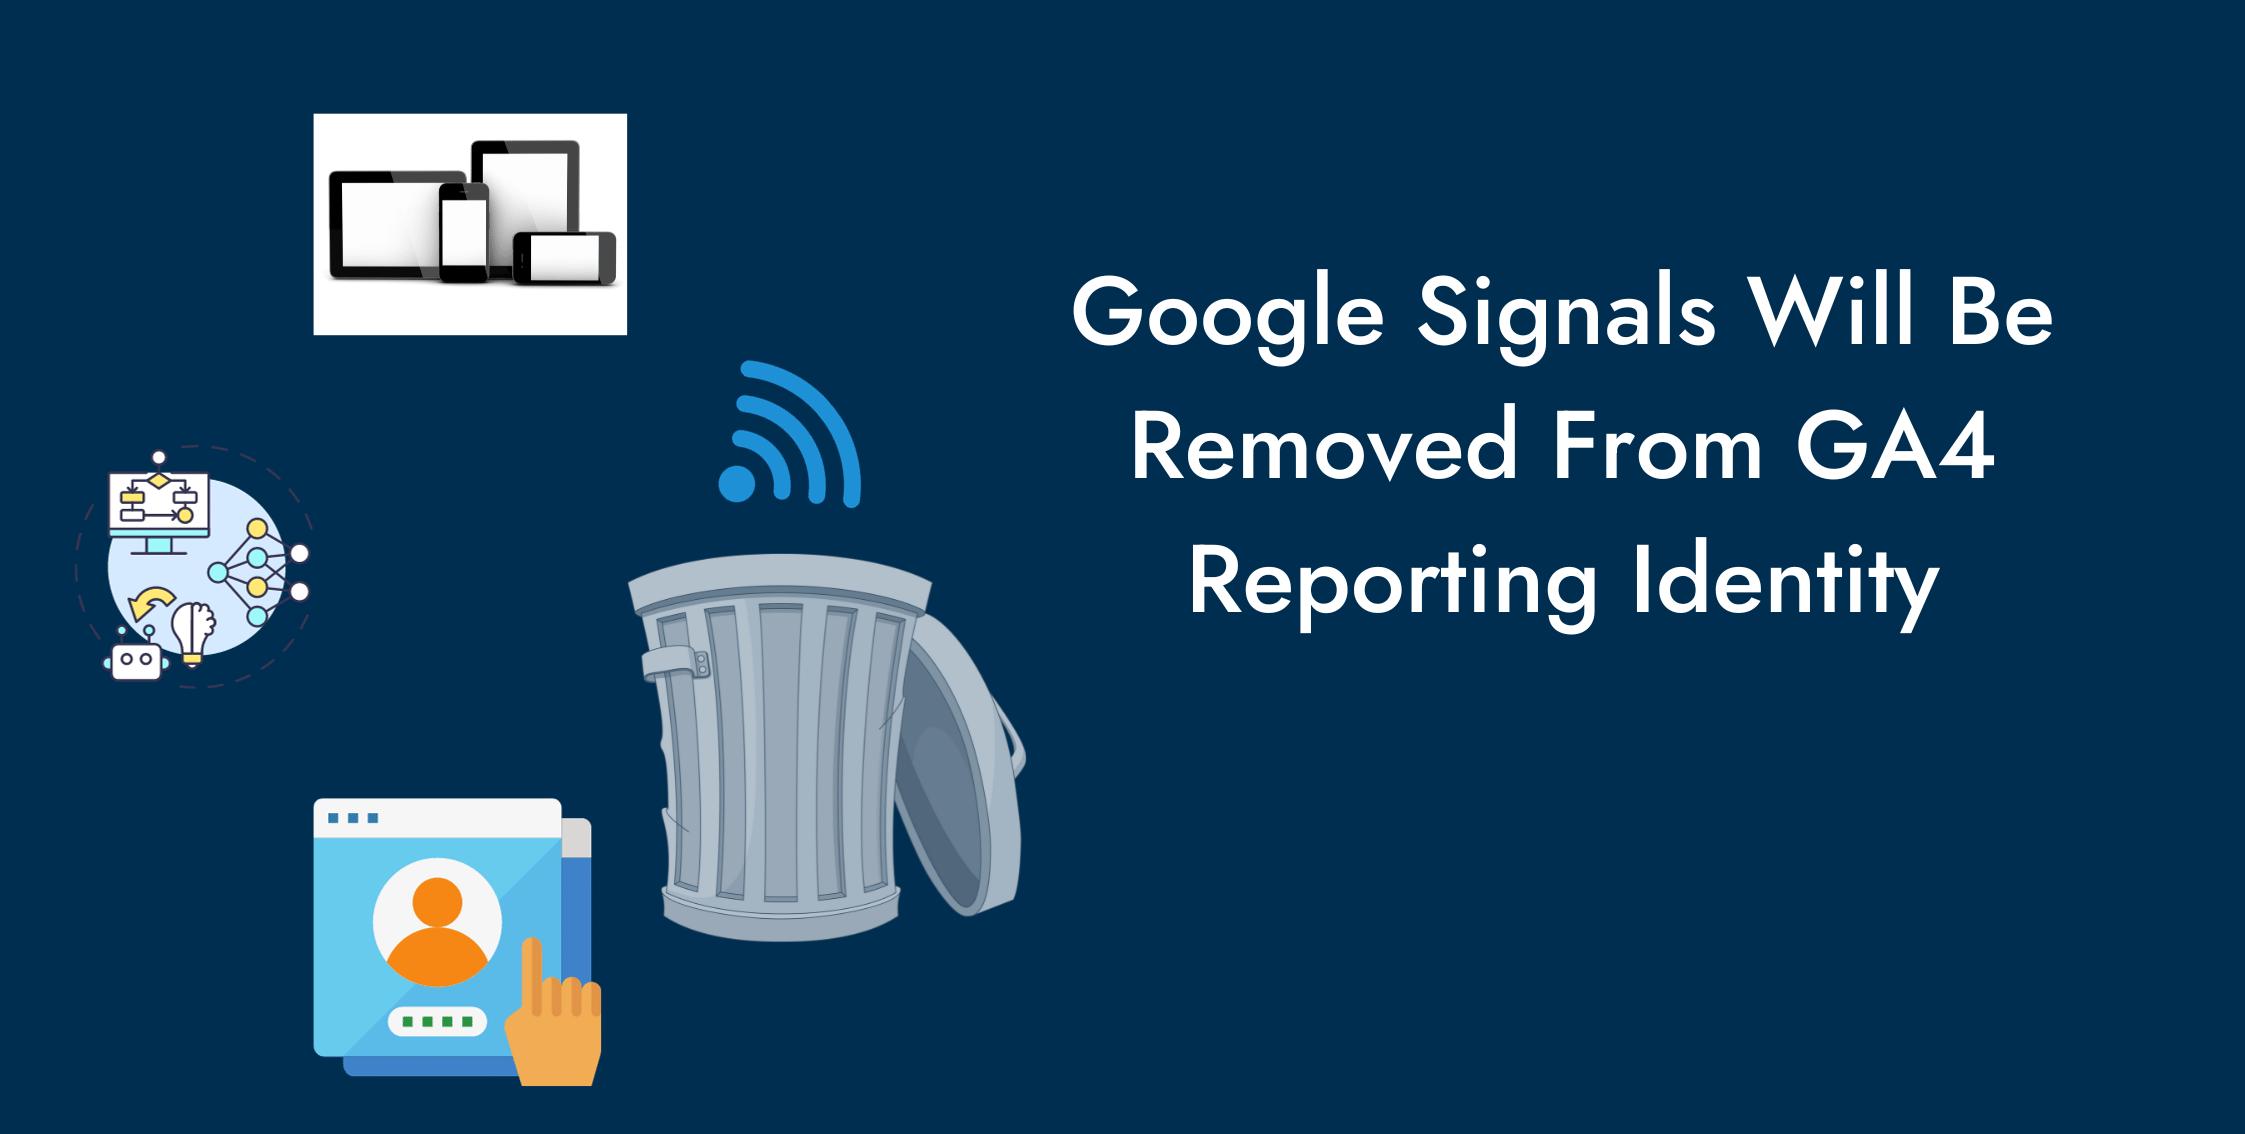 Google Signals Will Be Removed from GA4 Reporting Identities